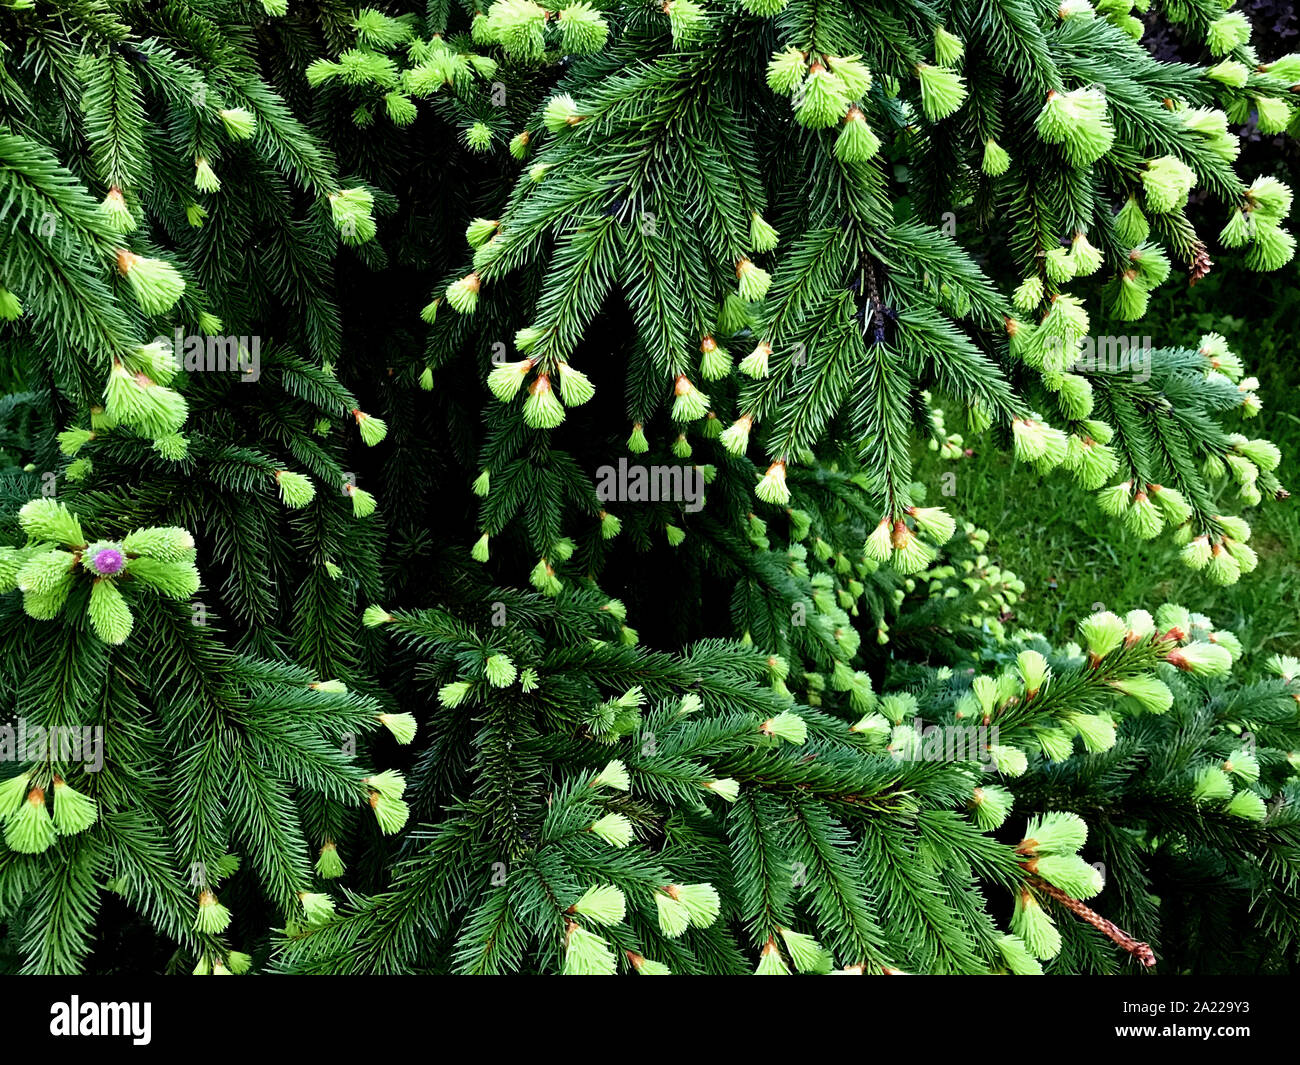 Blooming Spruce Acrocona, like a pink rose. Beautiful Christmas background of green fir needles. Stock Photo